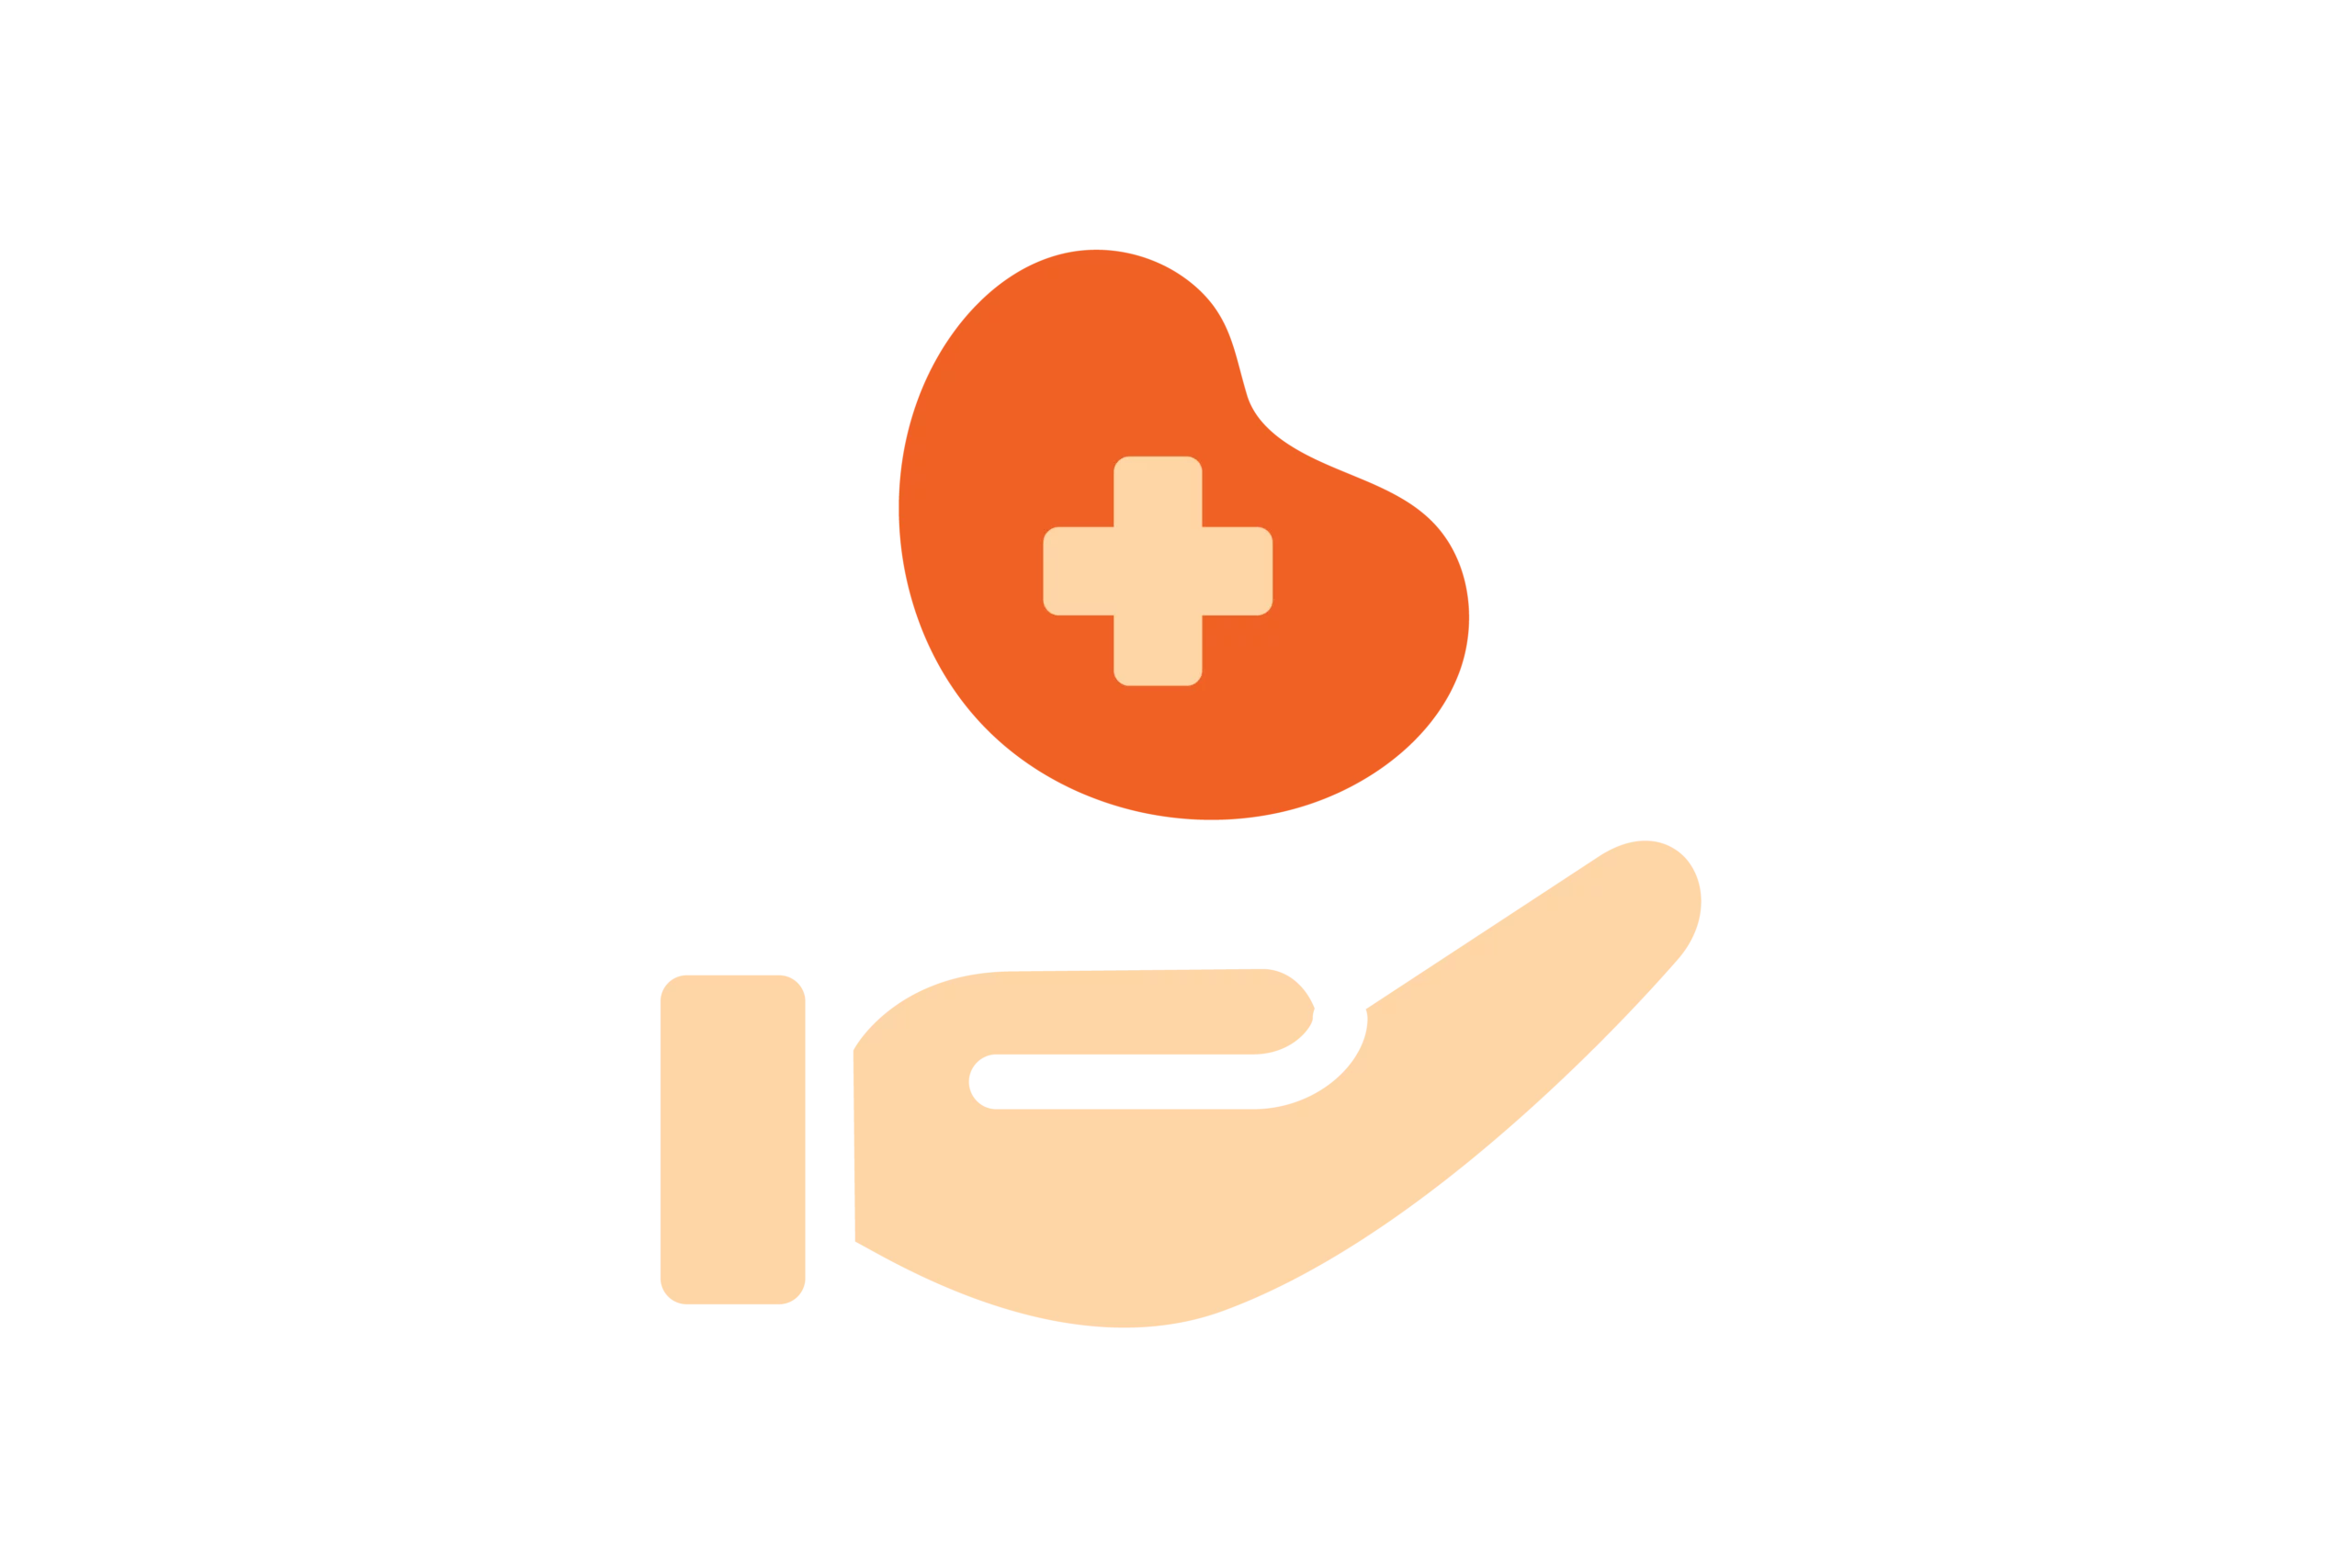 Illustration of a hand holding a kidney containing a health plus sign.